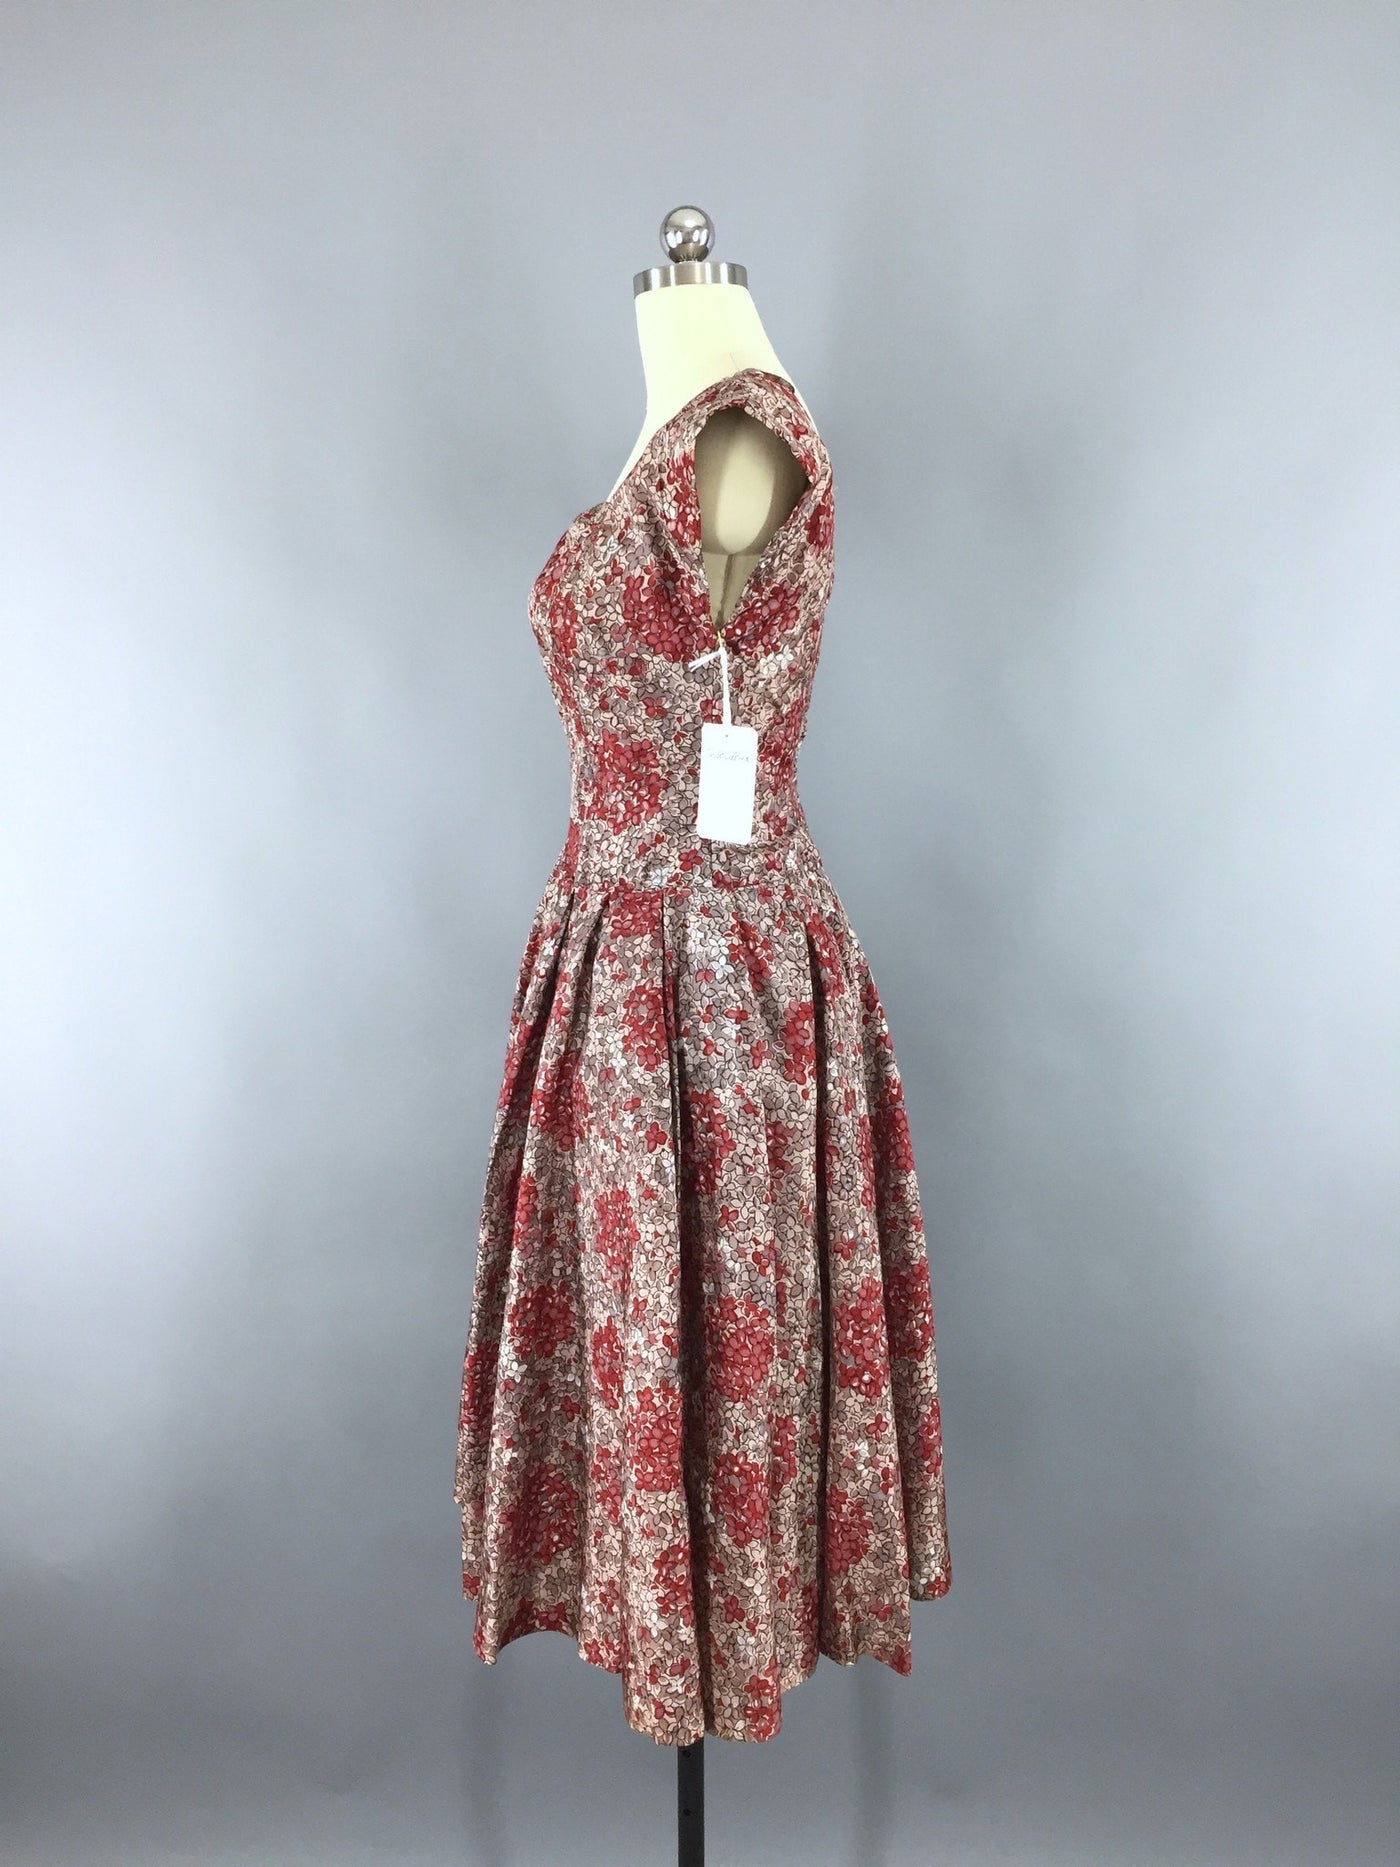 1950s Vintage Red and Taupe Floral Print Day Dress - ThisBlueBird